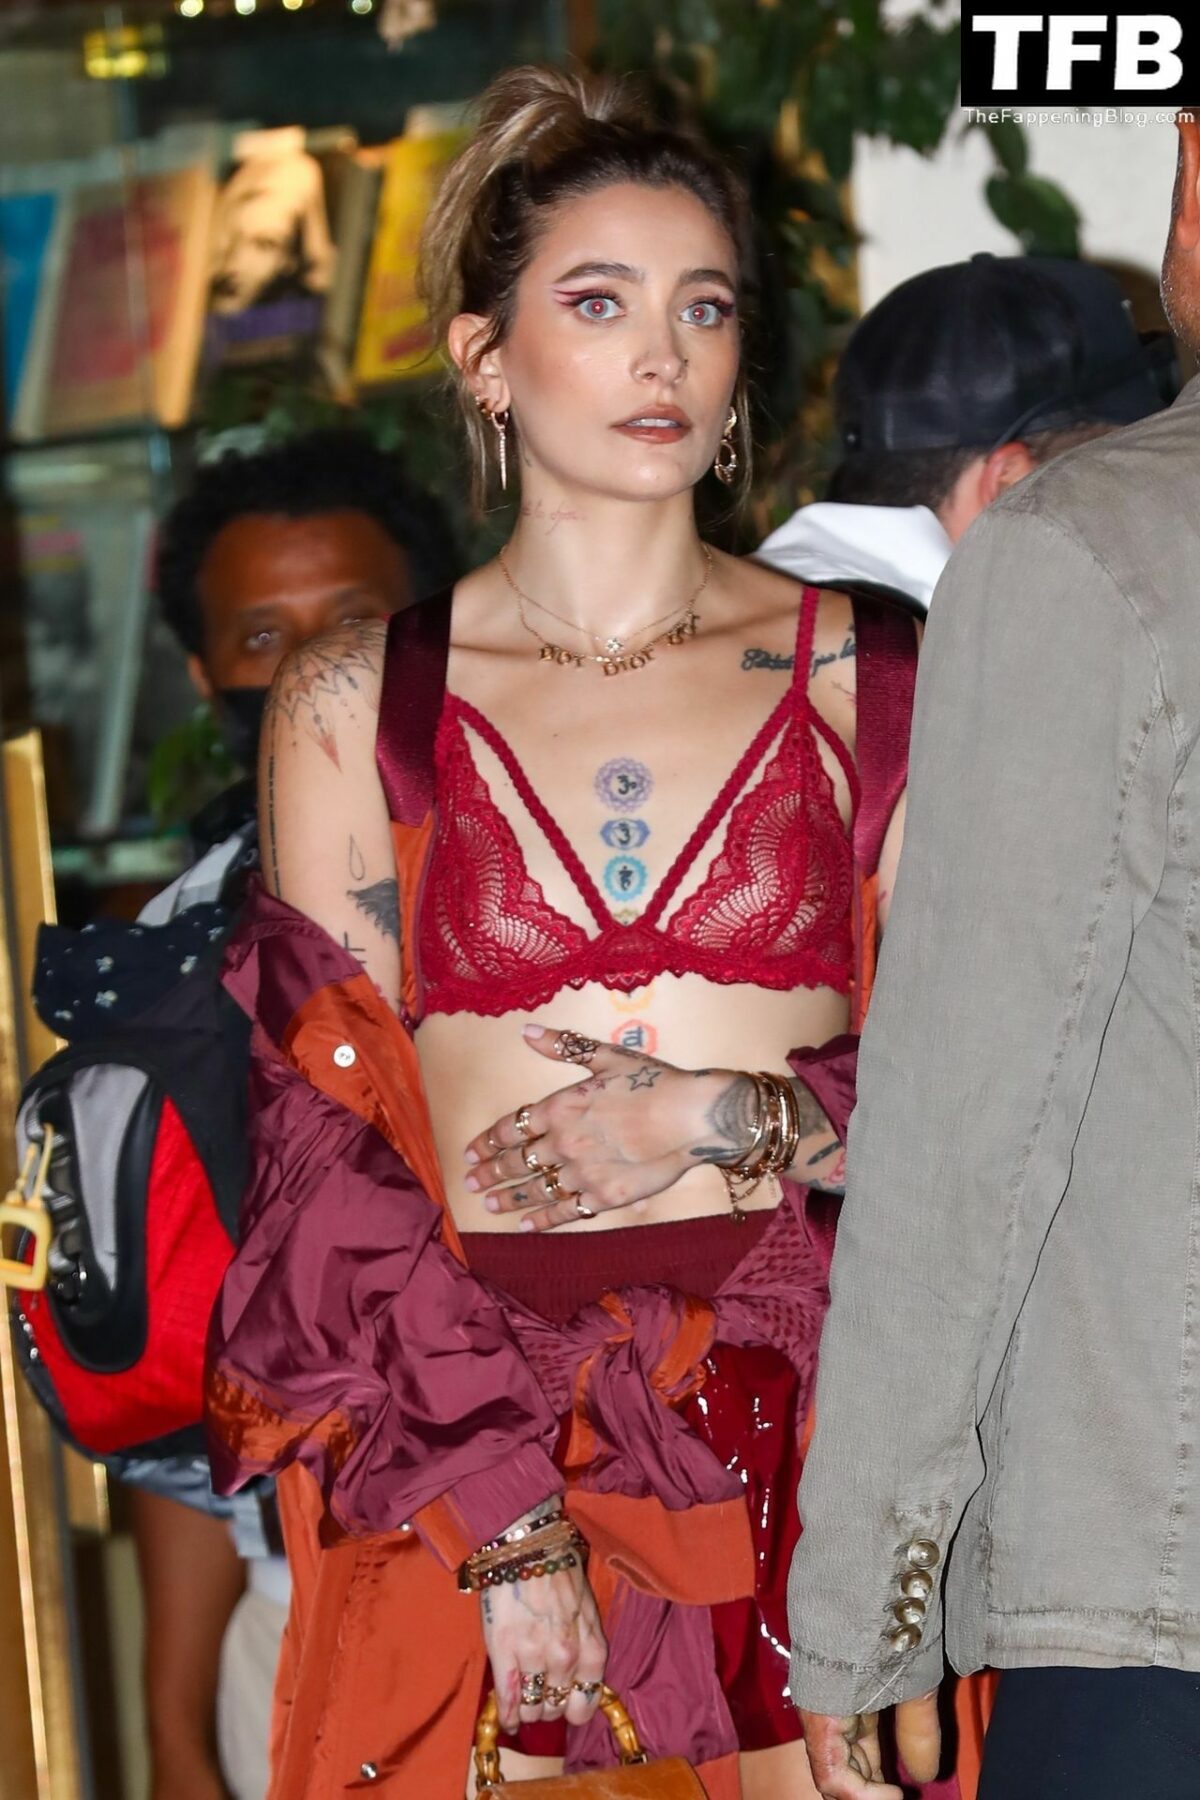 Paris Jackson See Through Nudity The Fappening Blog 1 1200x1800 - Paris Jackson Flashes Her Nude Tits Wearing a See-Through Bra in WeHo (34 Photos)